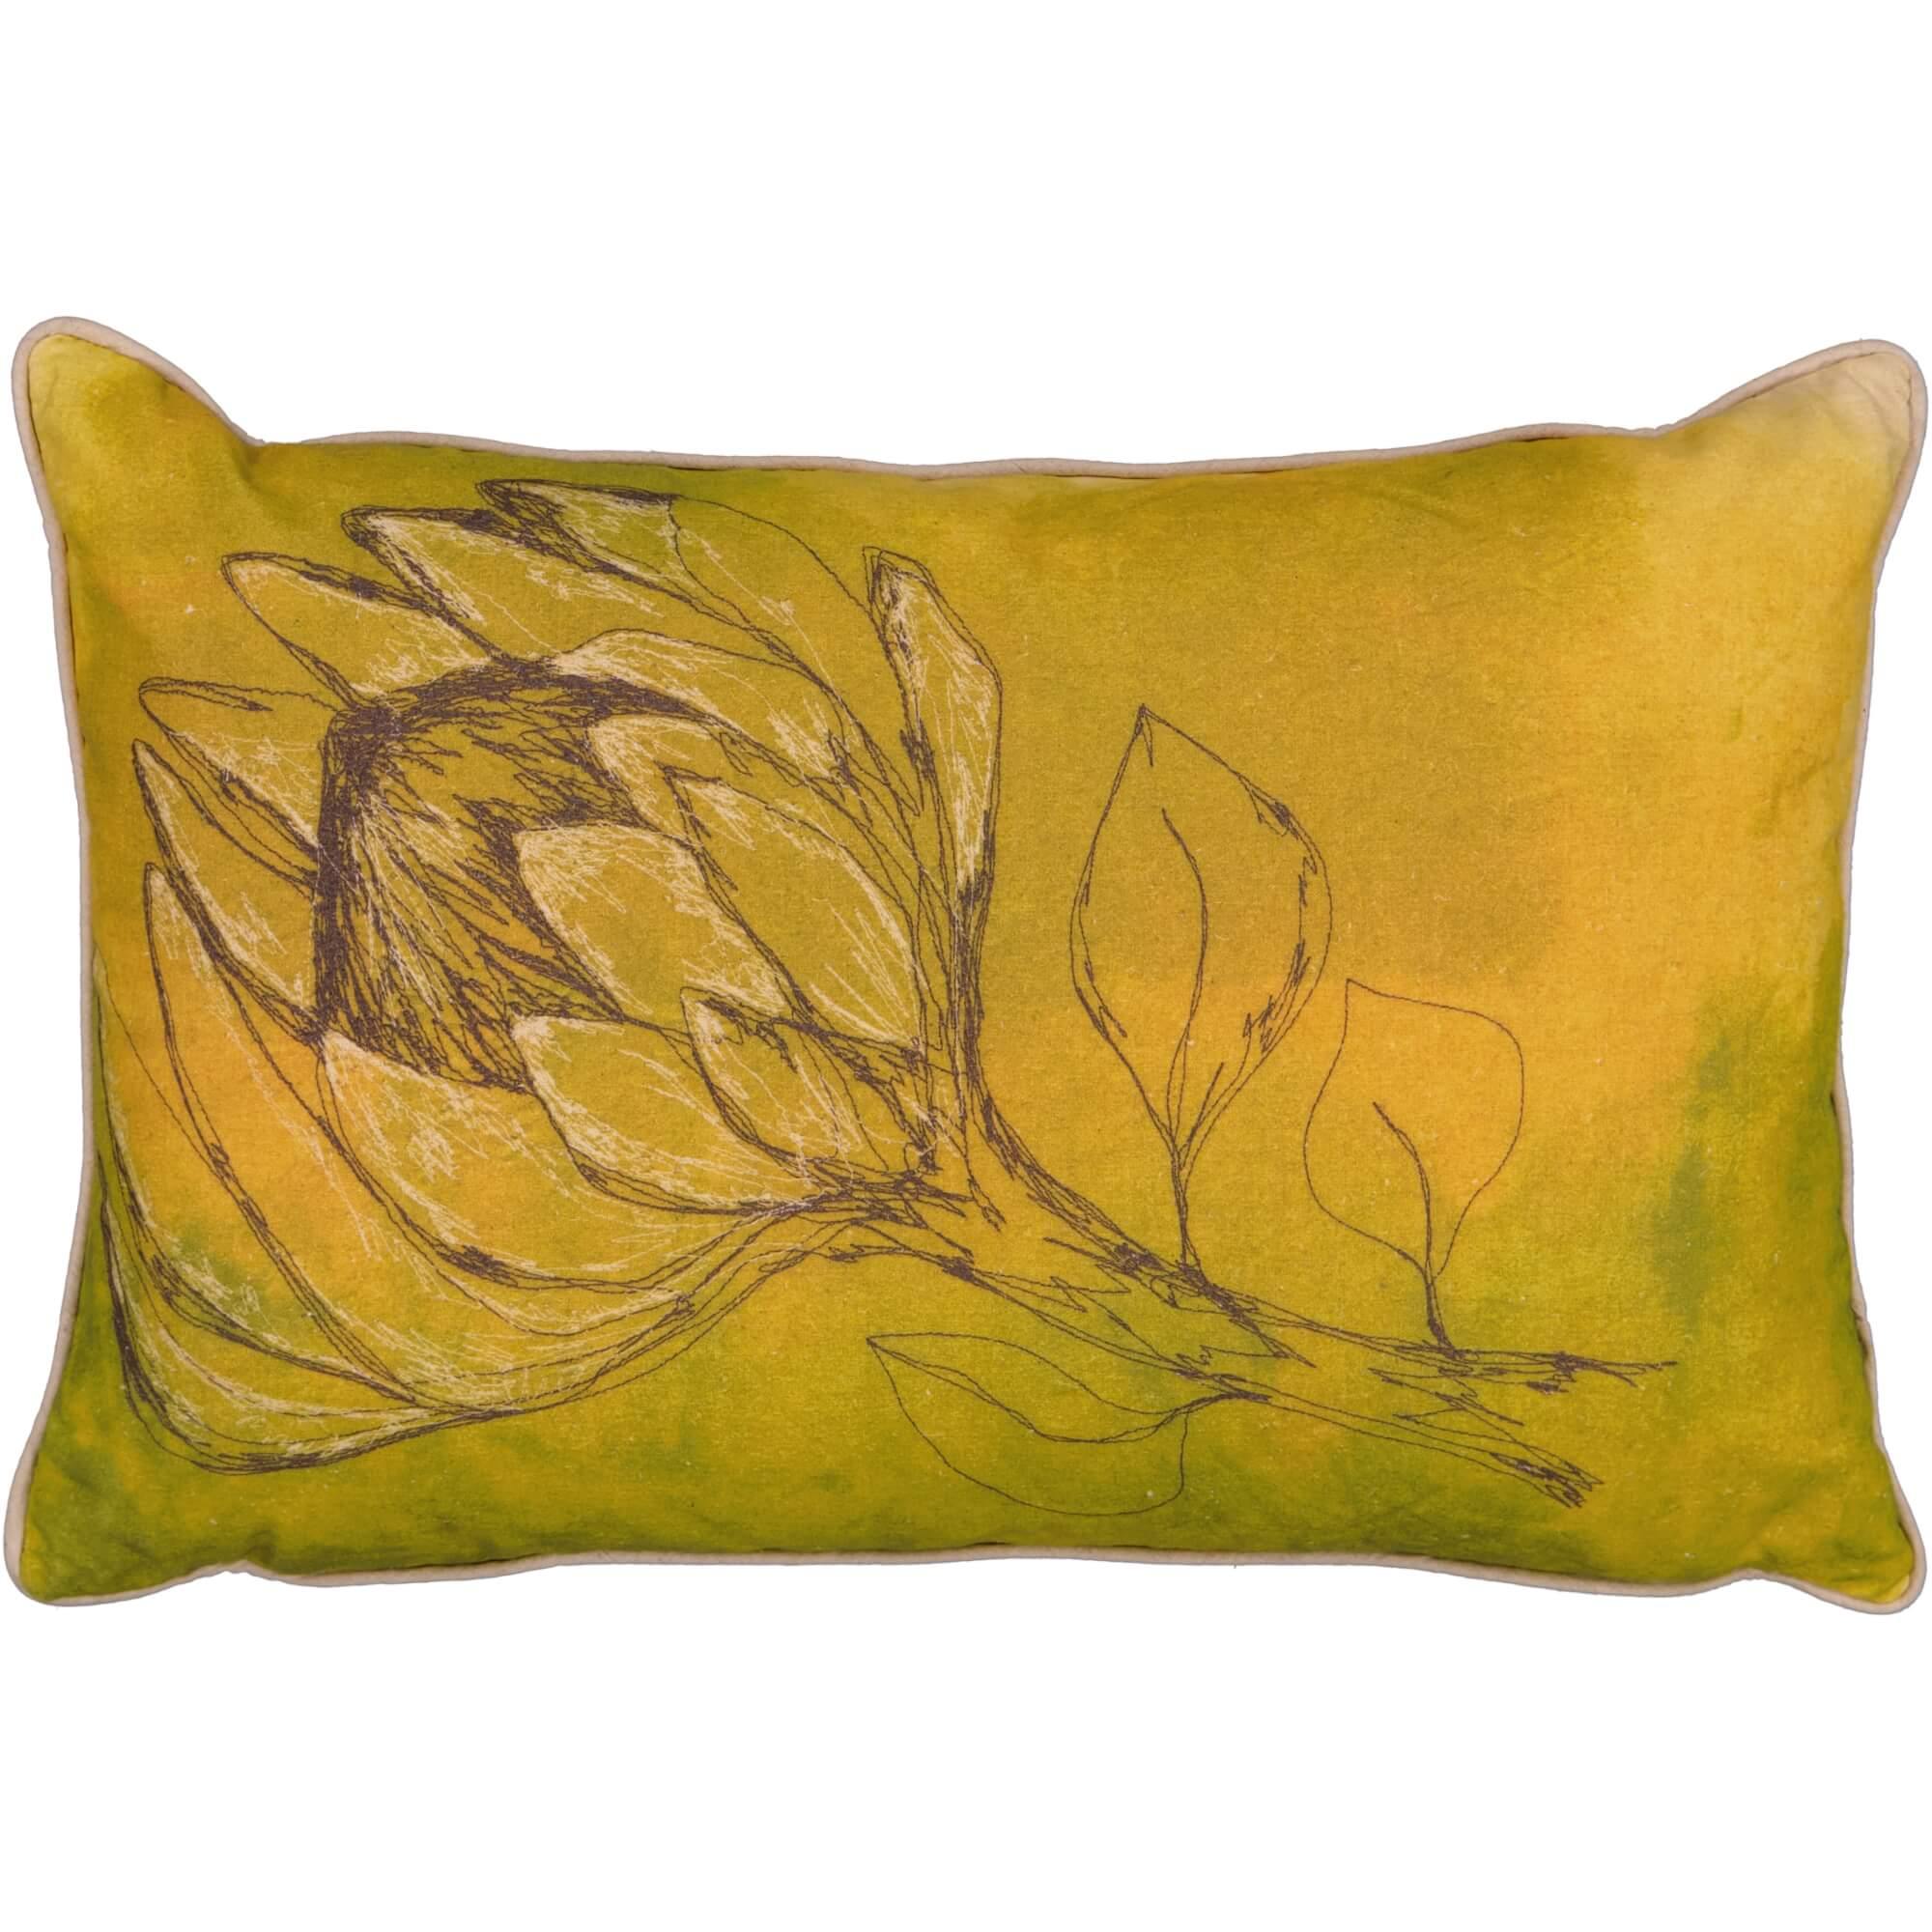 Chartreuse Protea Cushion Cover (Printed) - threads that bind us